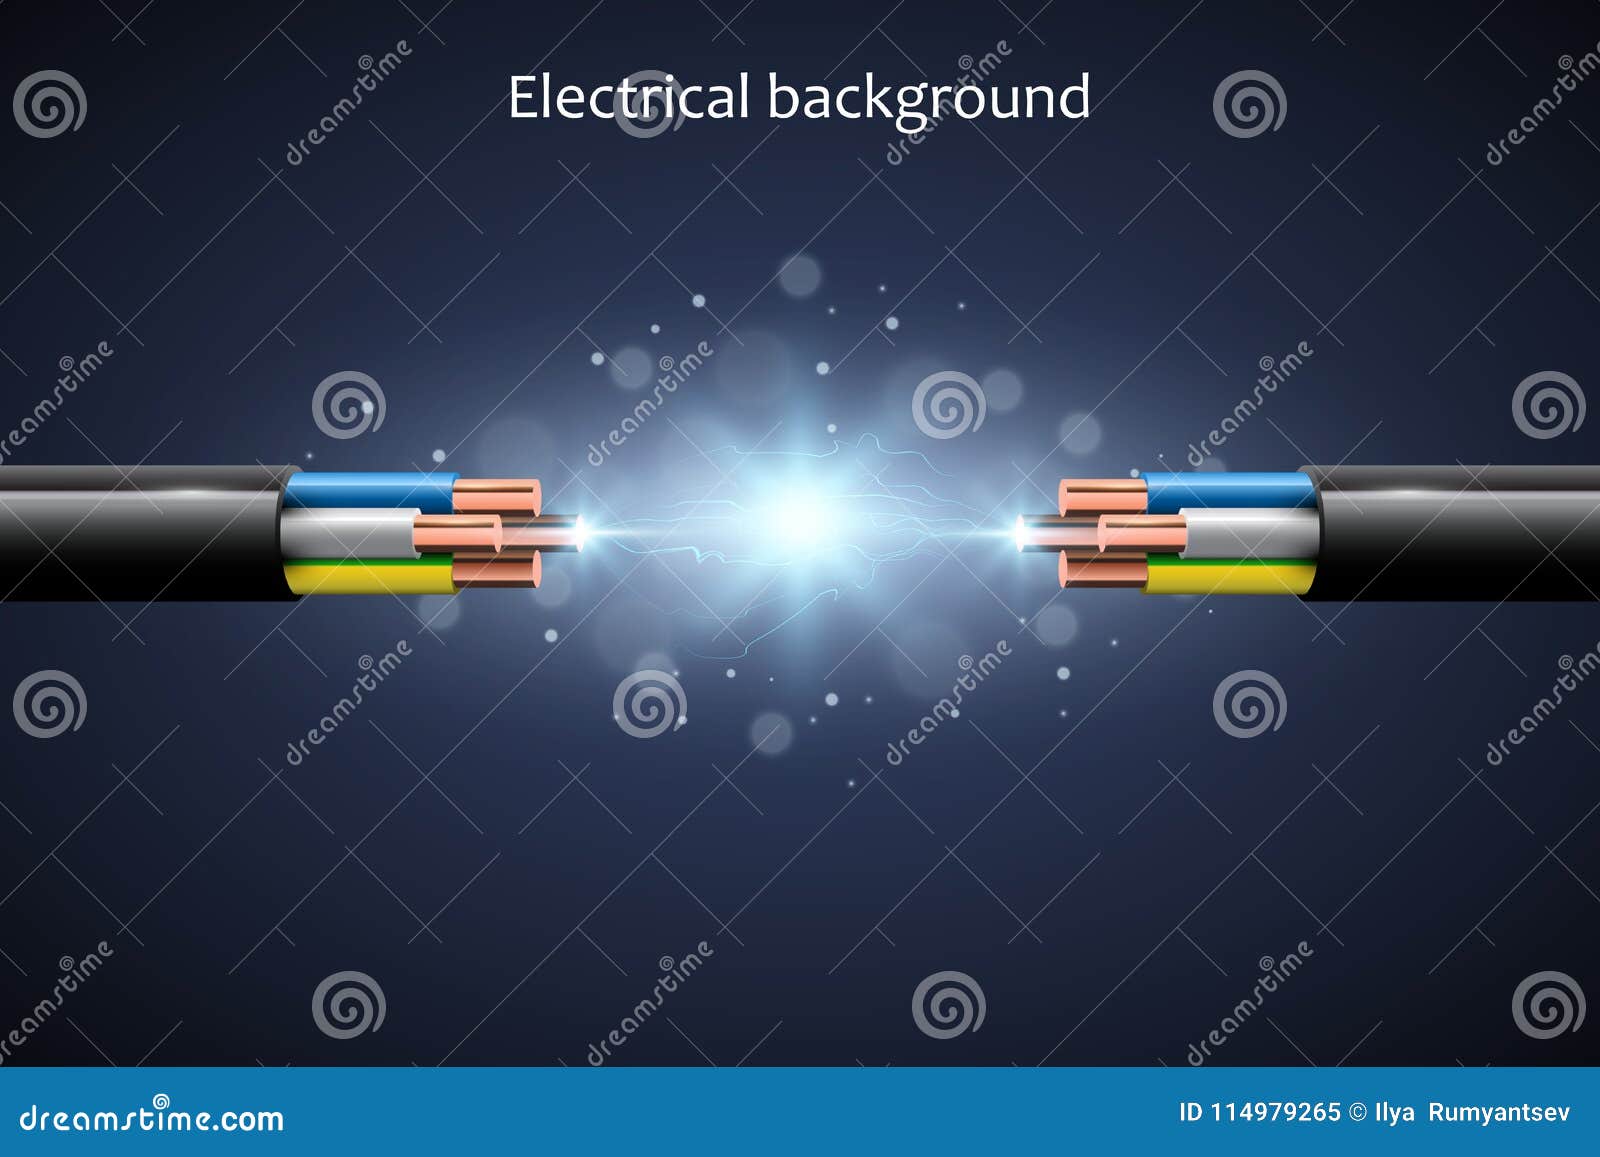 abstract background with electrical cables